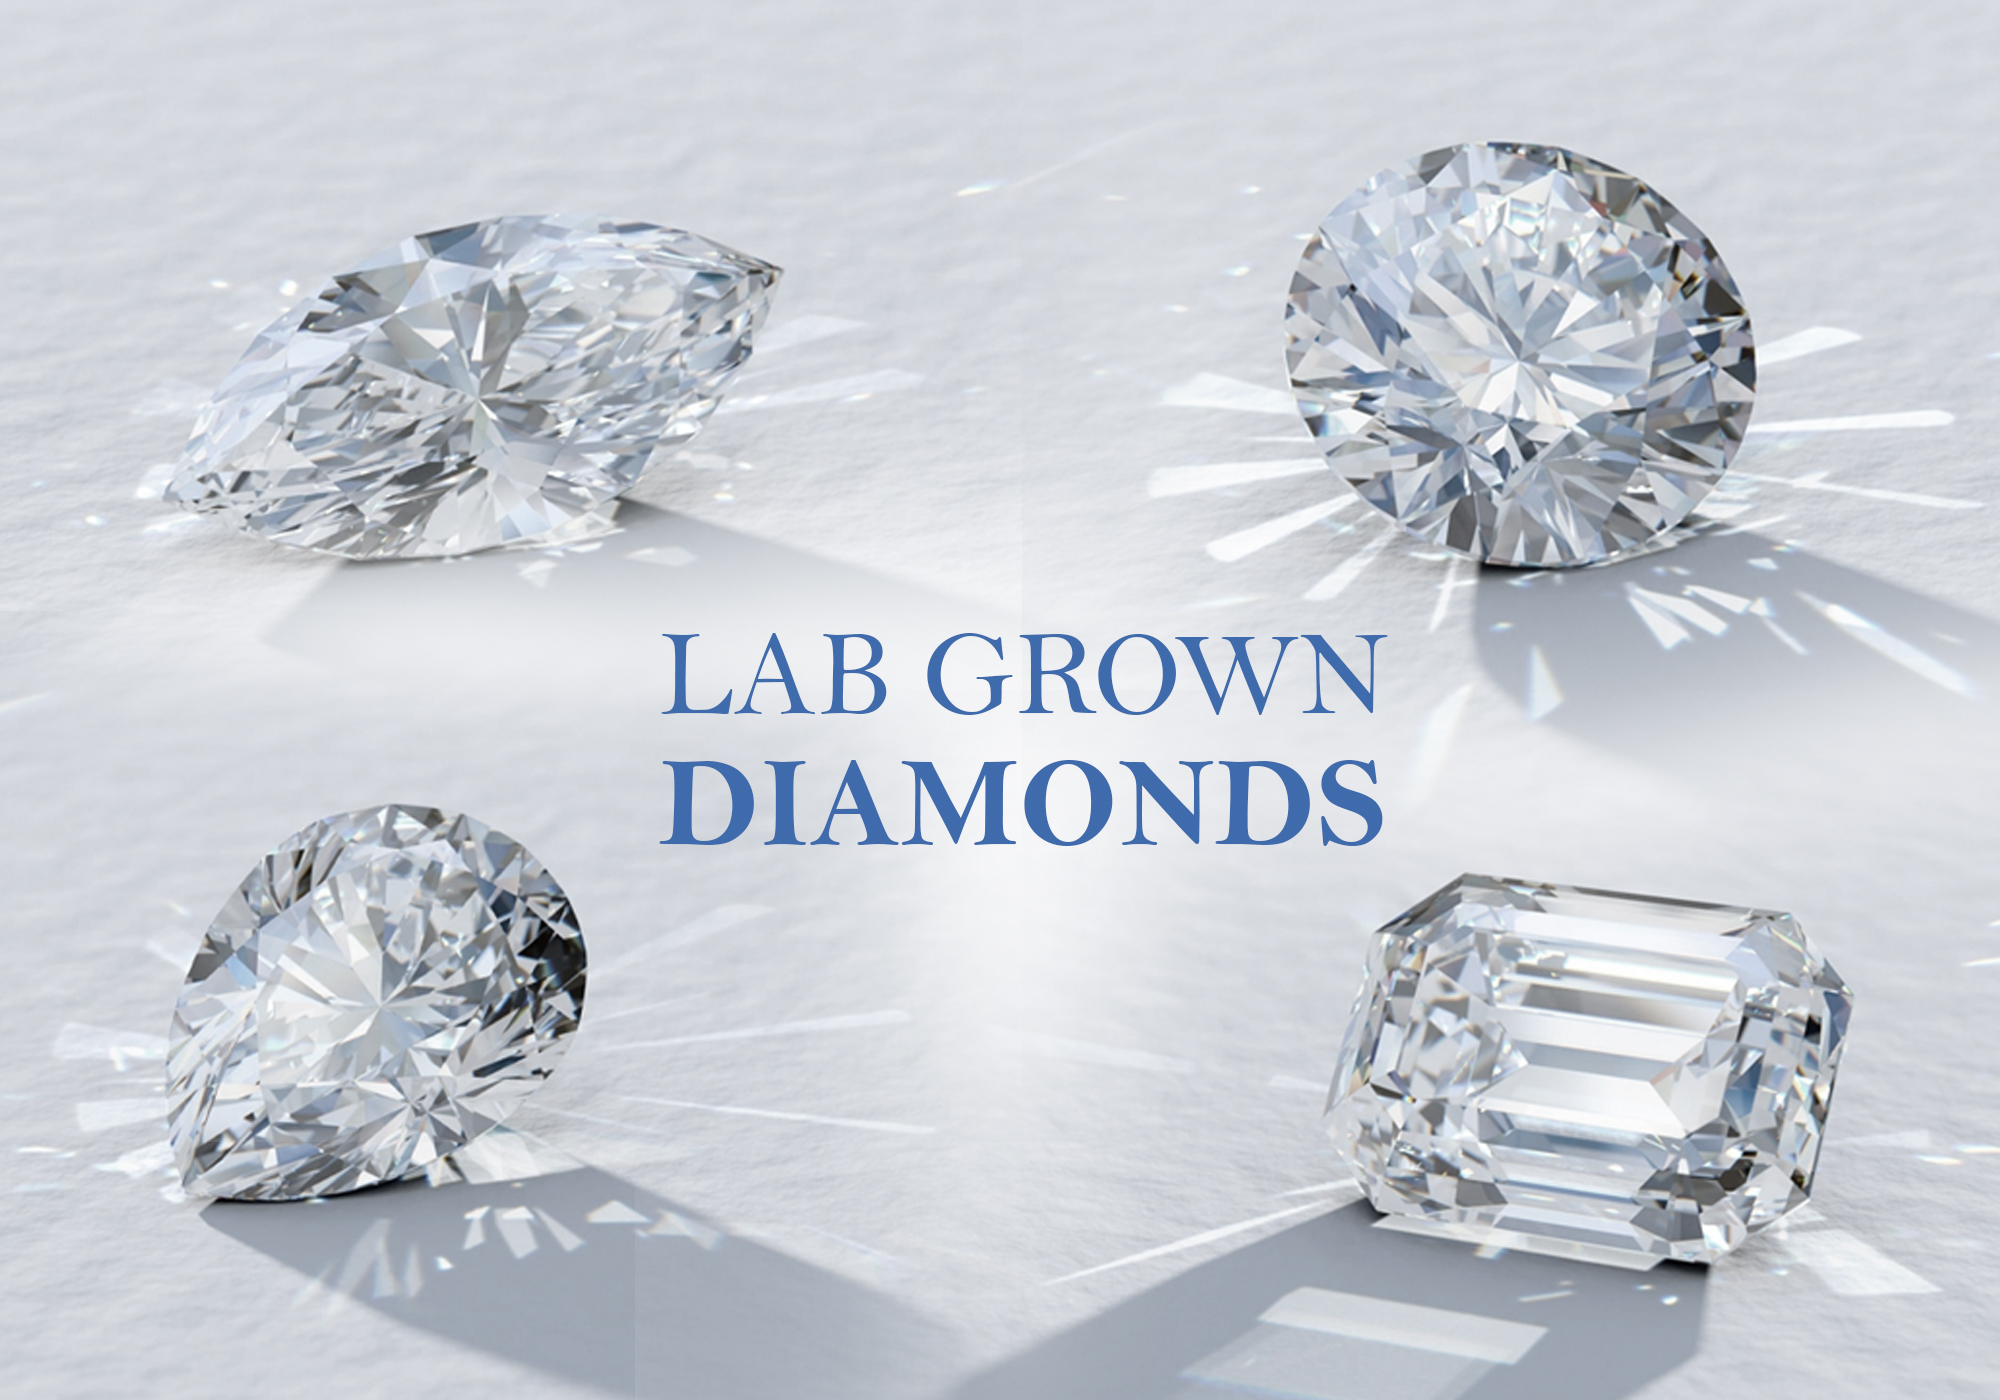 What is a lab grown diamond